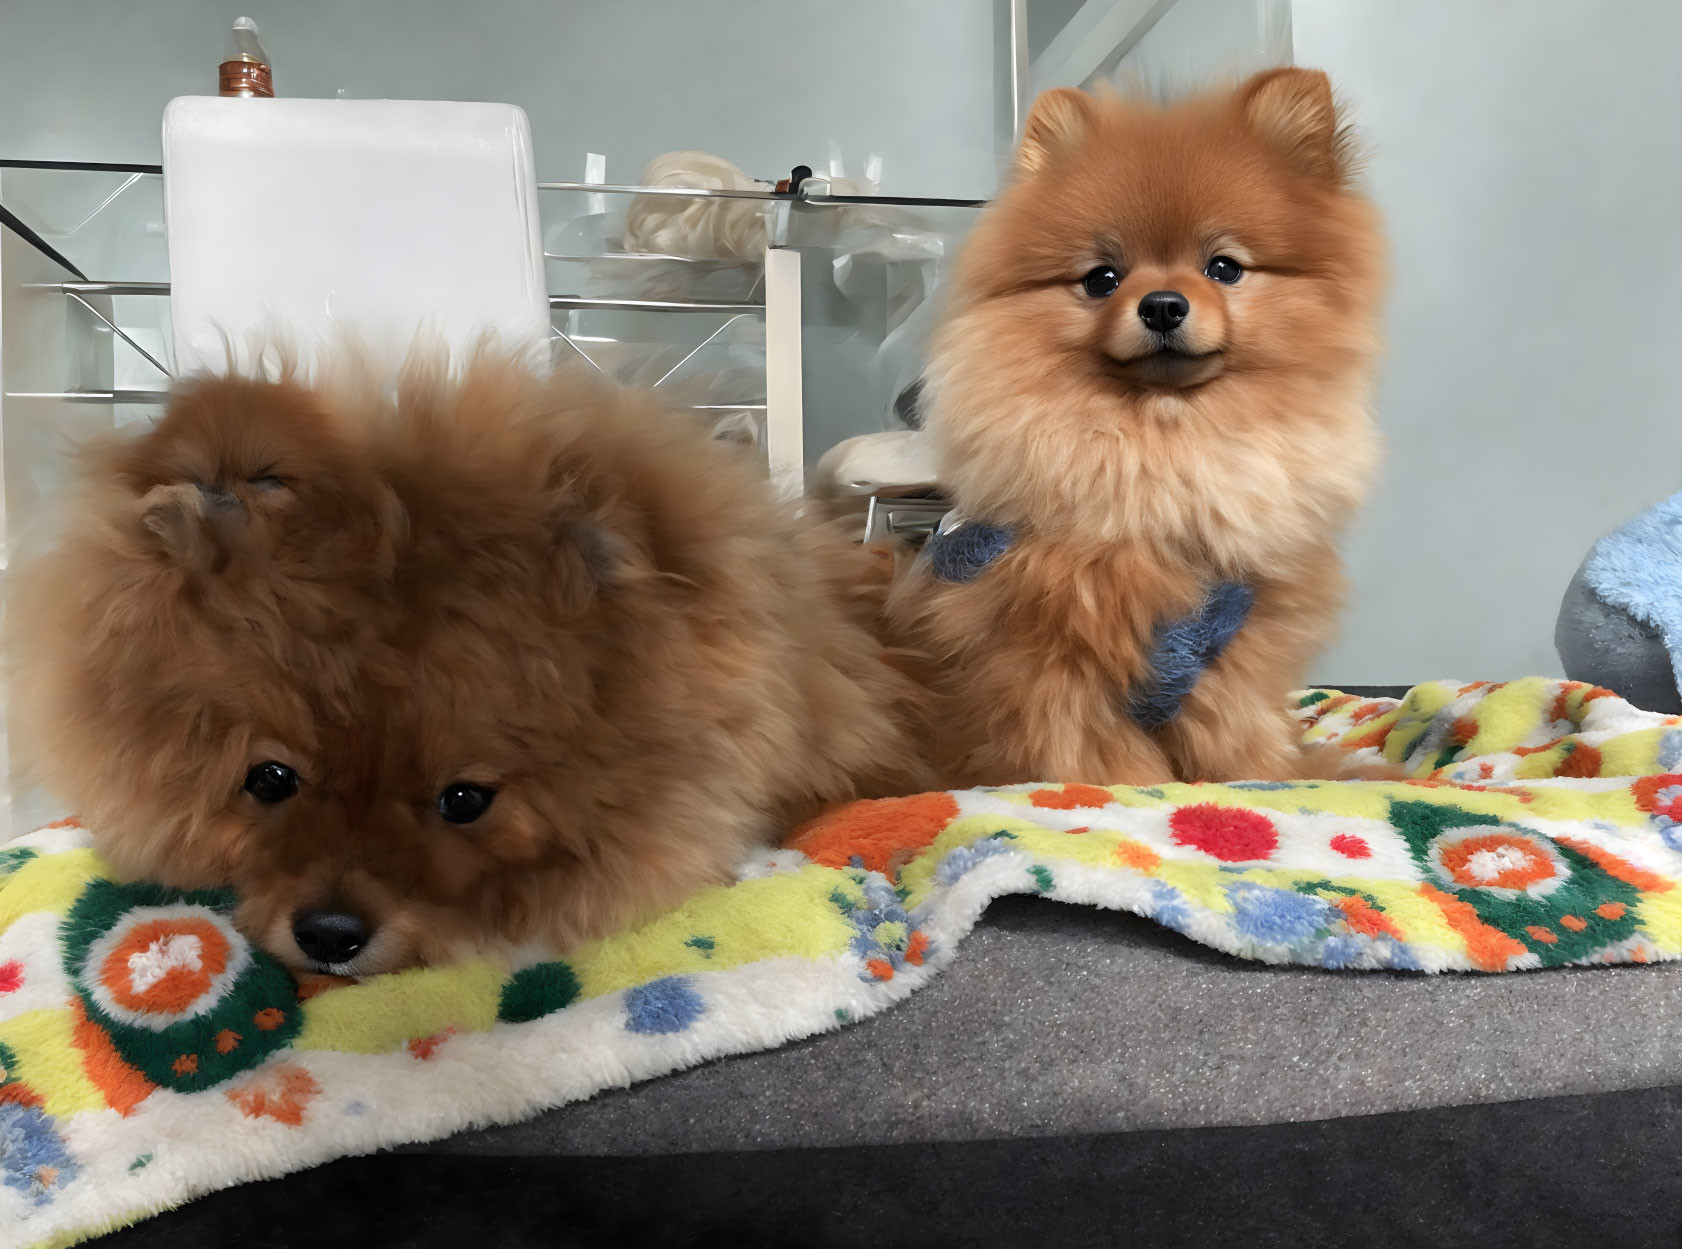 Fluffy Pomeranian Dogs on Colorful Blanket with Blue Bow Tie